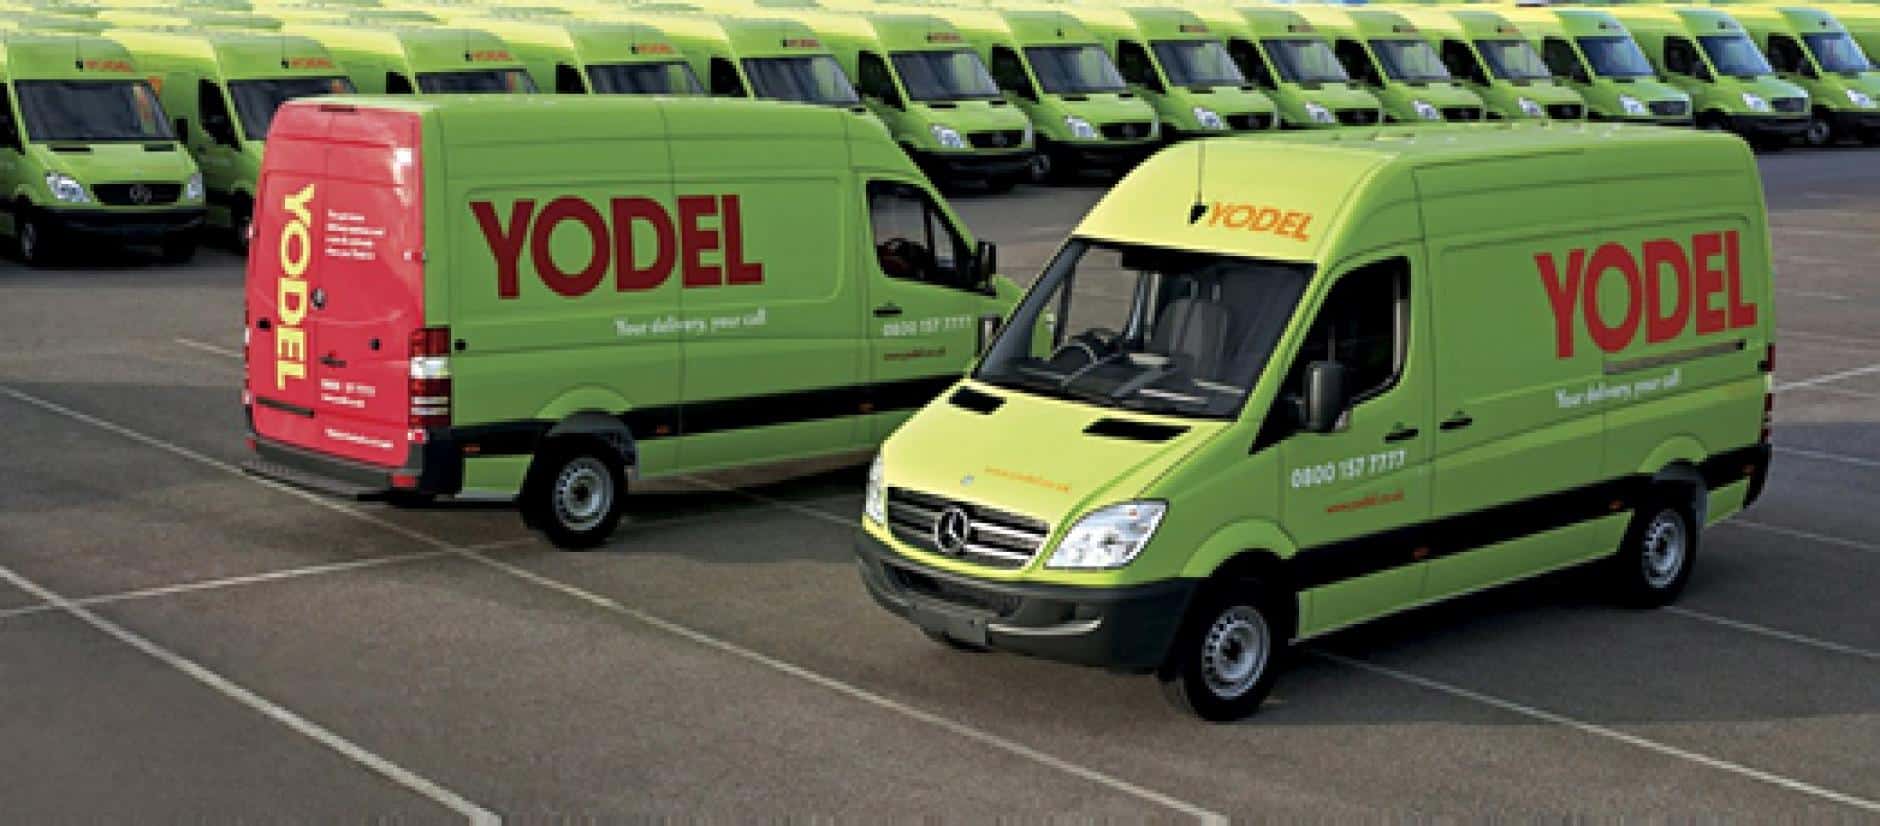 Mike Cooper appointed CEO of Yodel